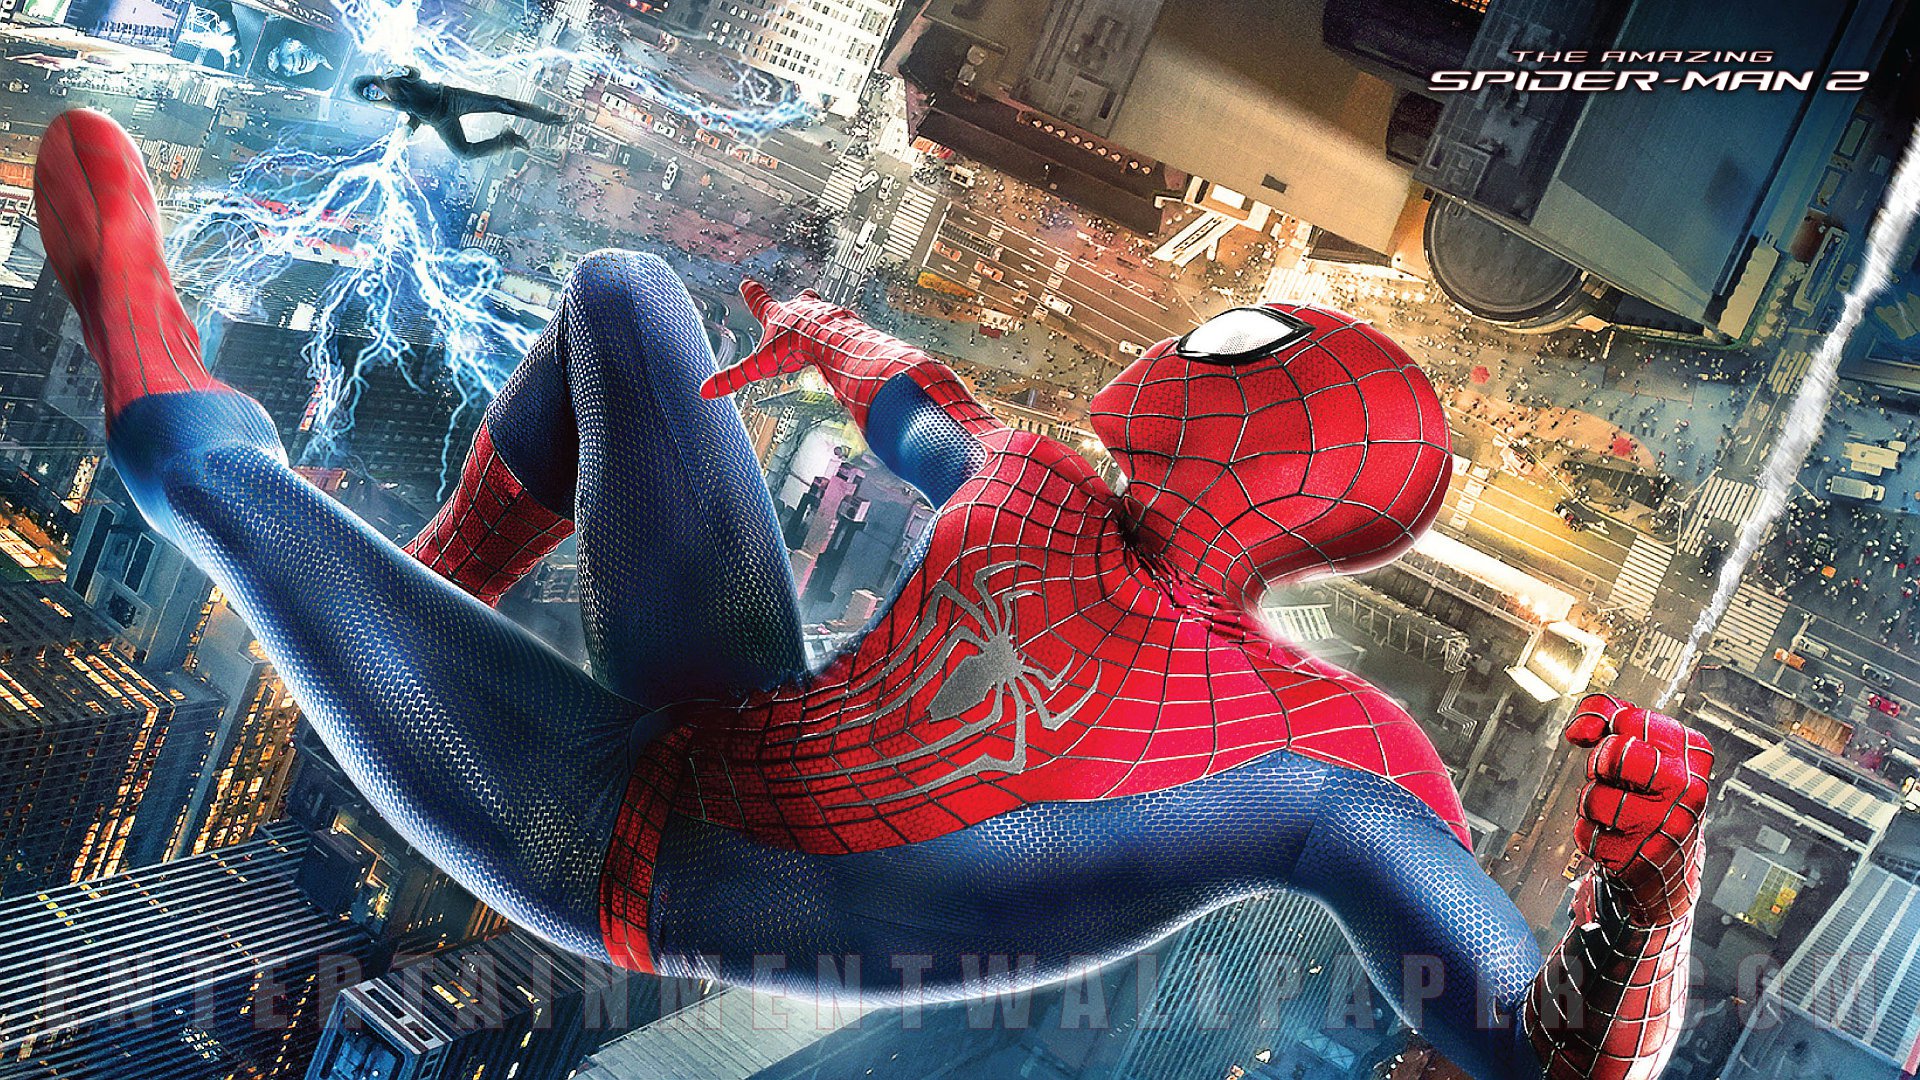 The Amazing Spider Man 2 [15] HD Wallpapers and Images Collection